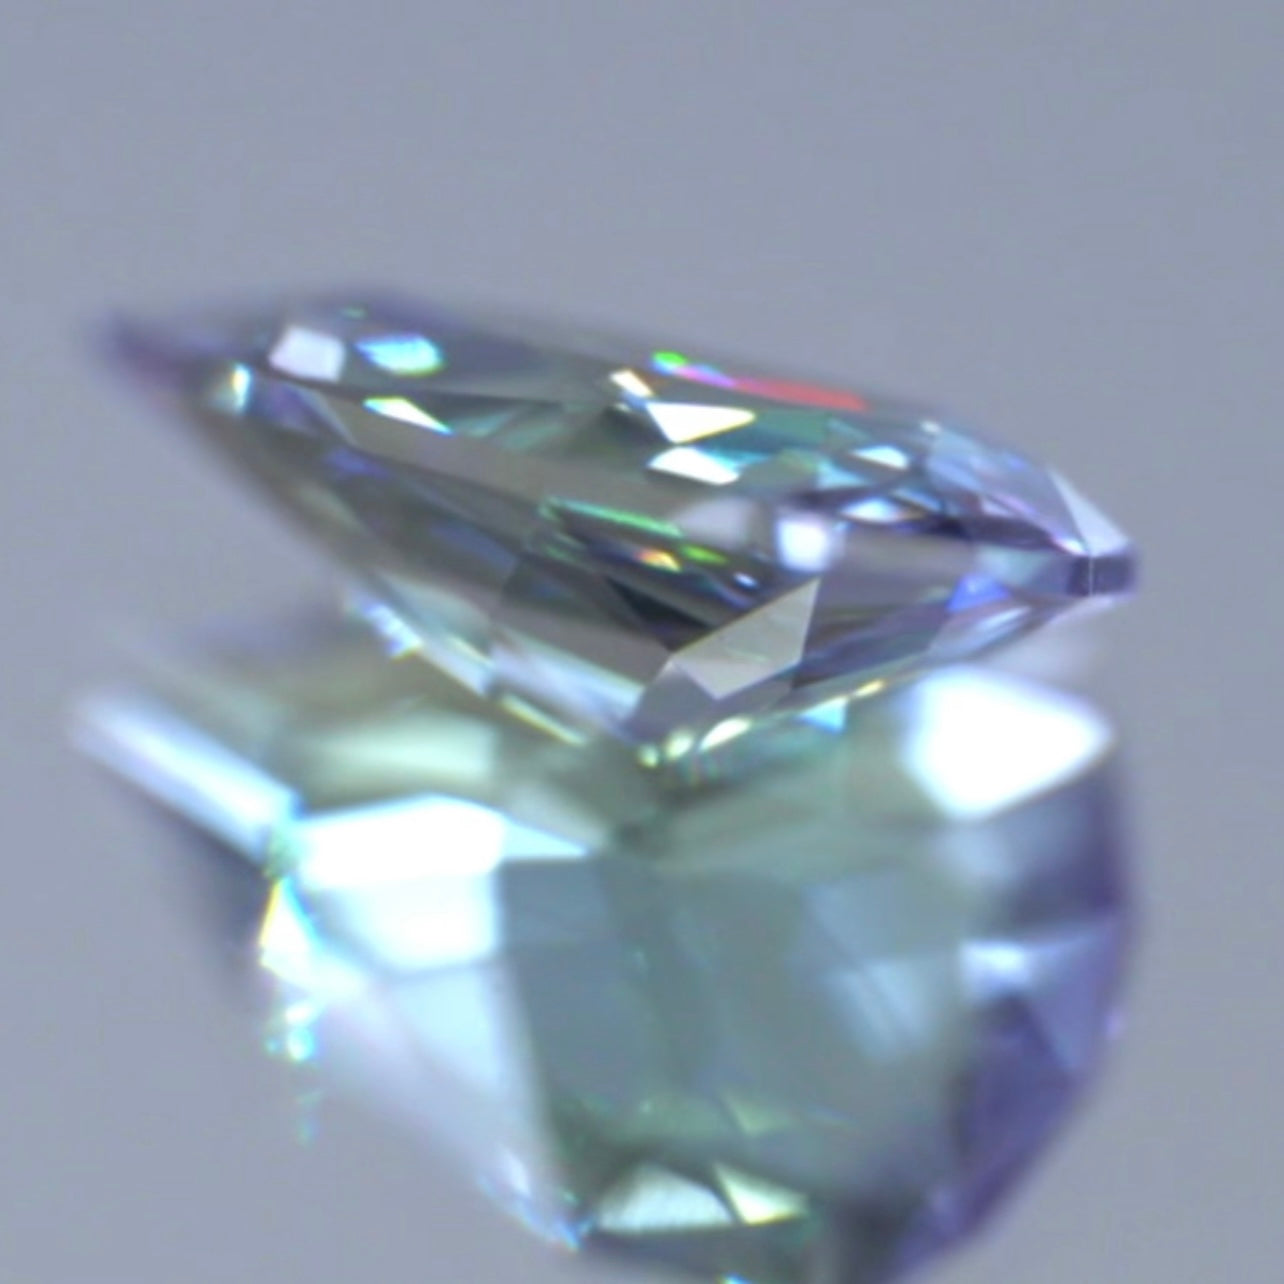 【SOLD OUT】非加熱タンザナイト(ゾイサイト)1.654ct💎ピアッちゃん作品✨お問合せ一番乗り特価でご紹介です♪